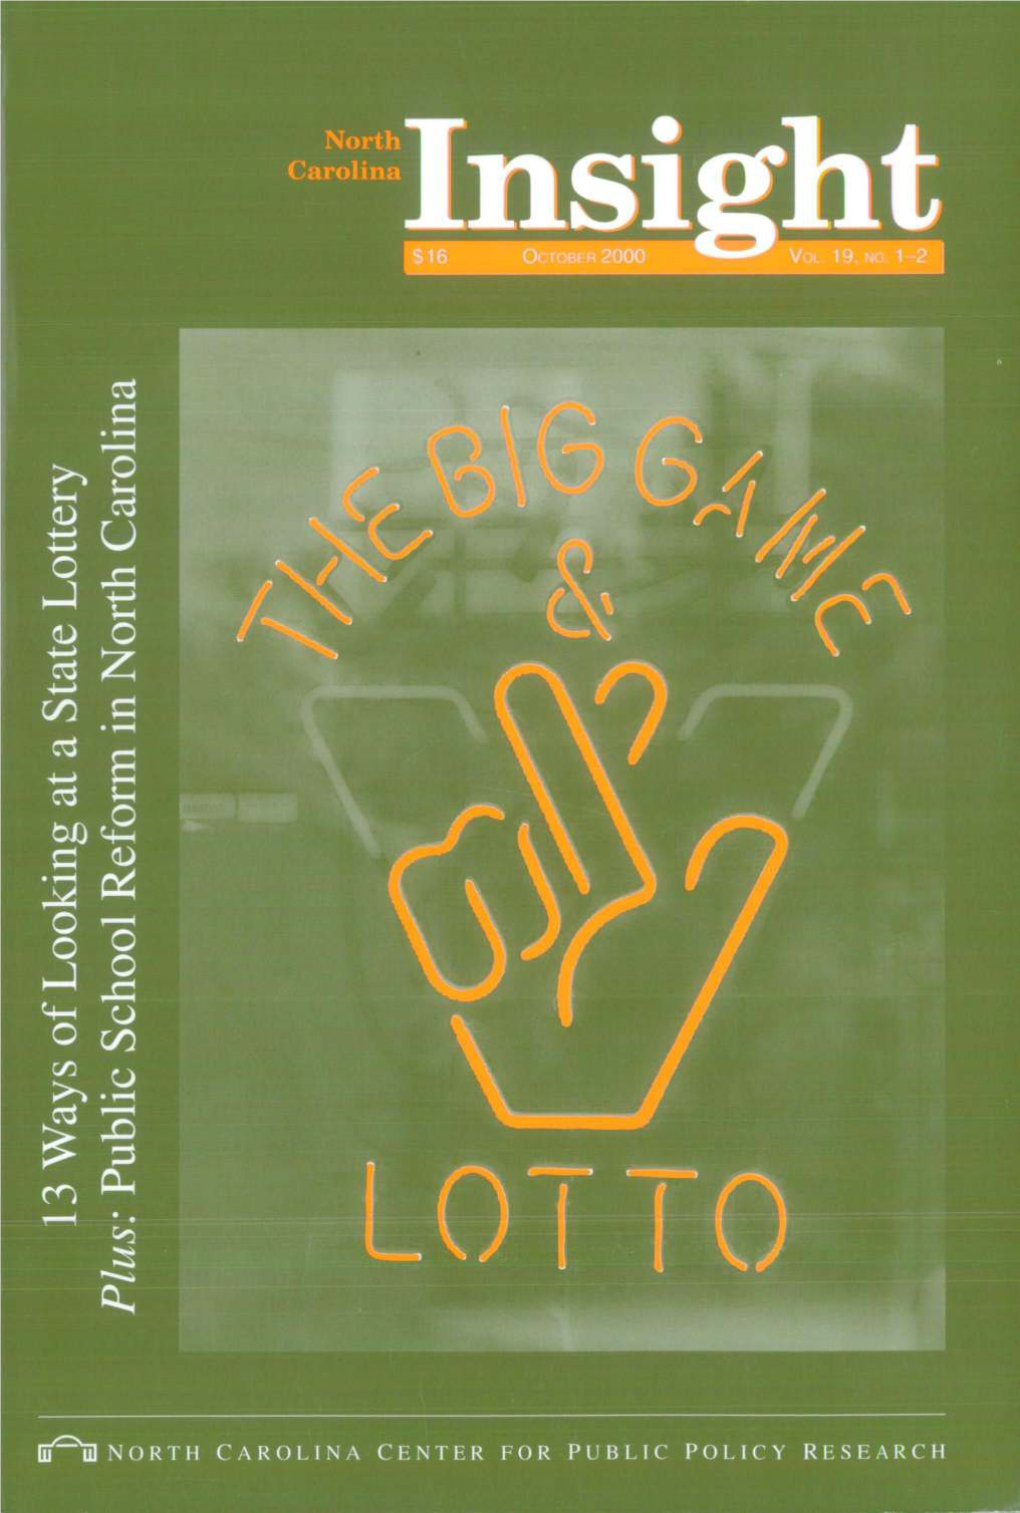 Winning the Lottery: What Are the Odds? -Gregory Gunter